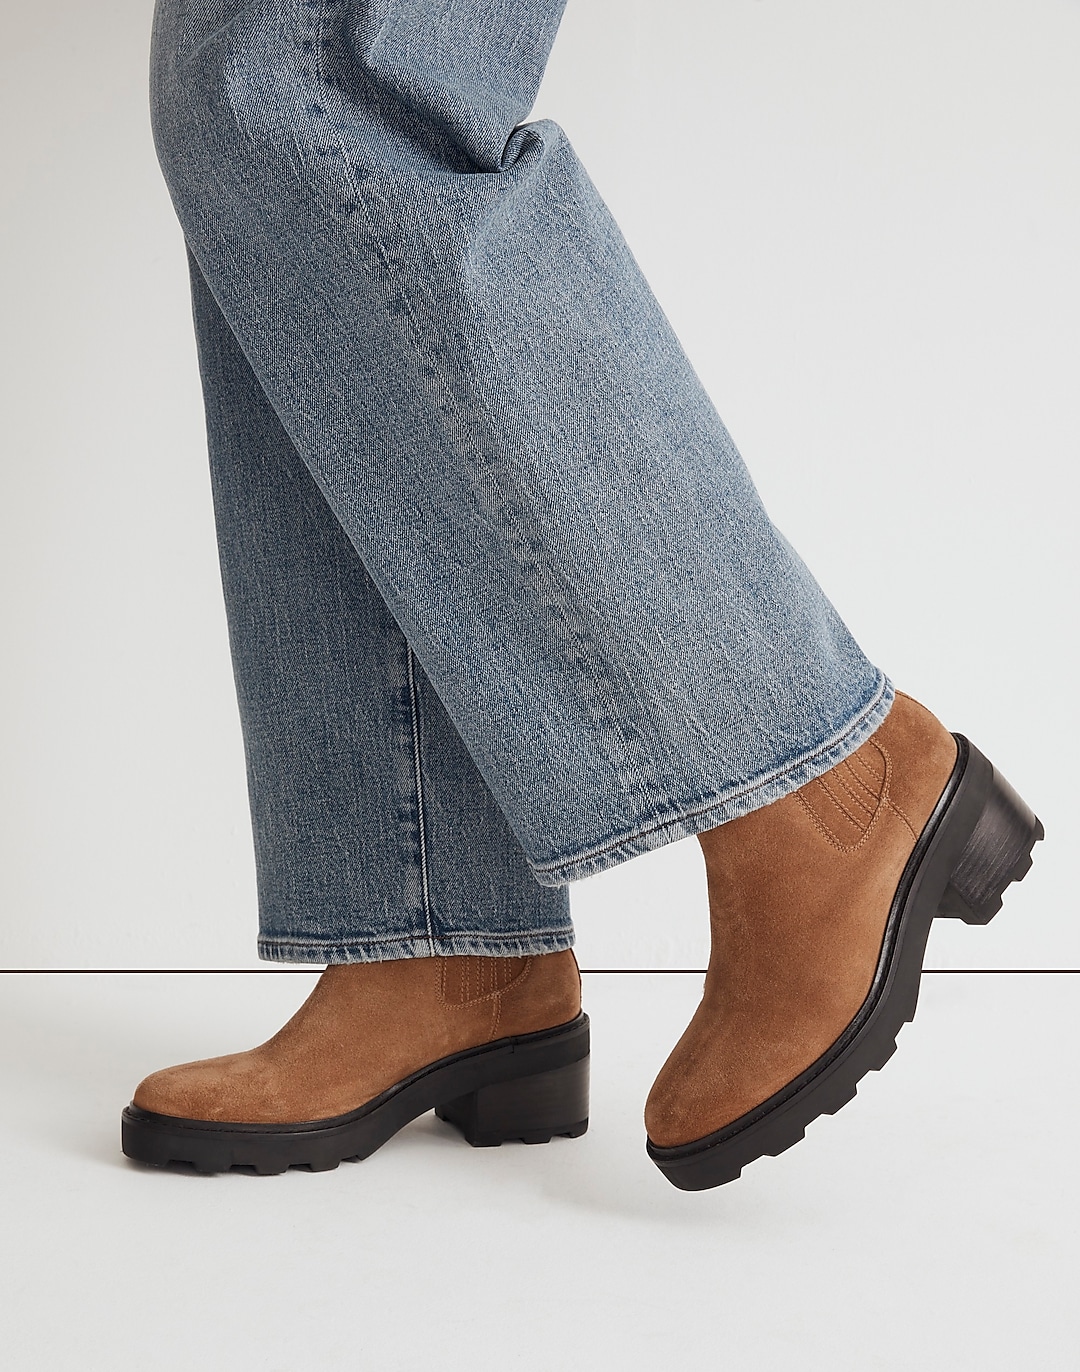 The Gwenda Platform Ankle Boot in Suede | Madewell